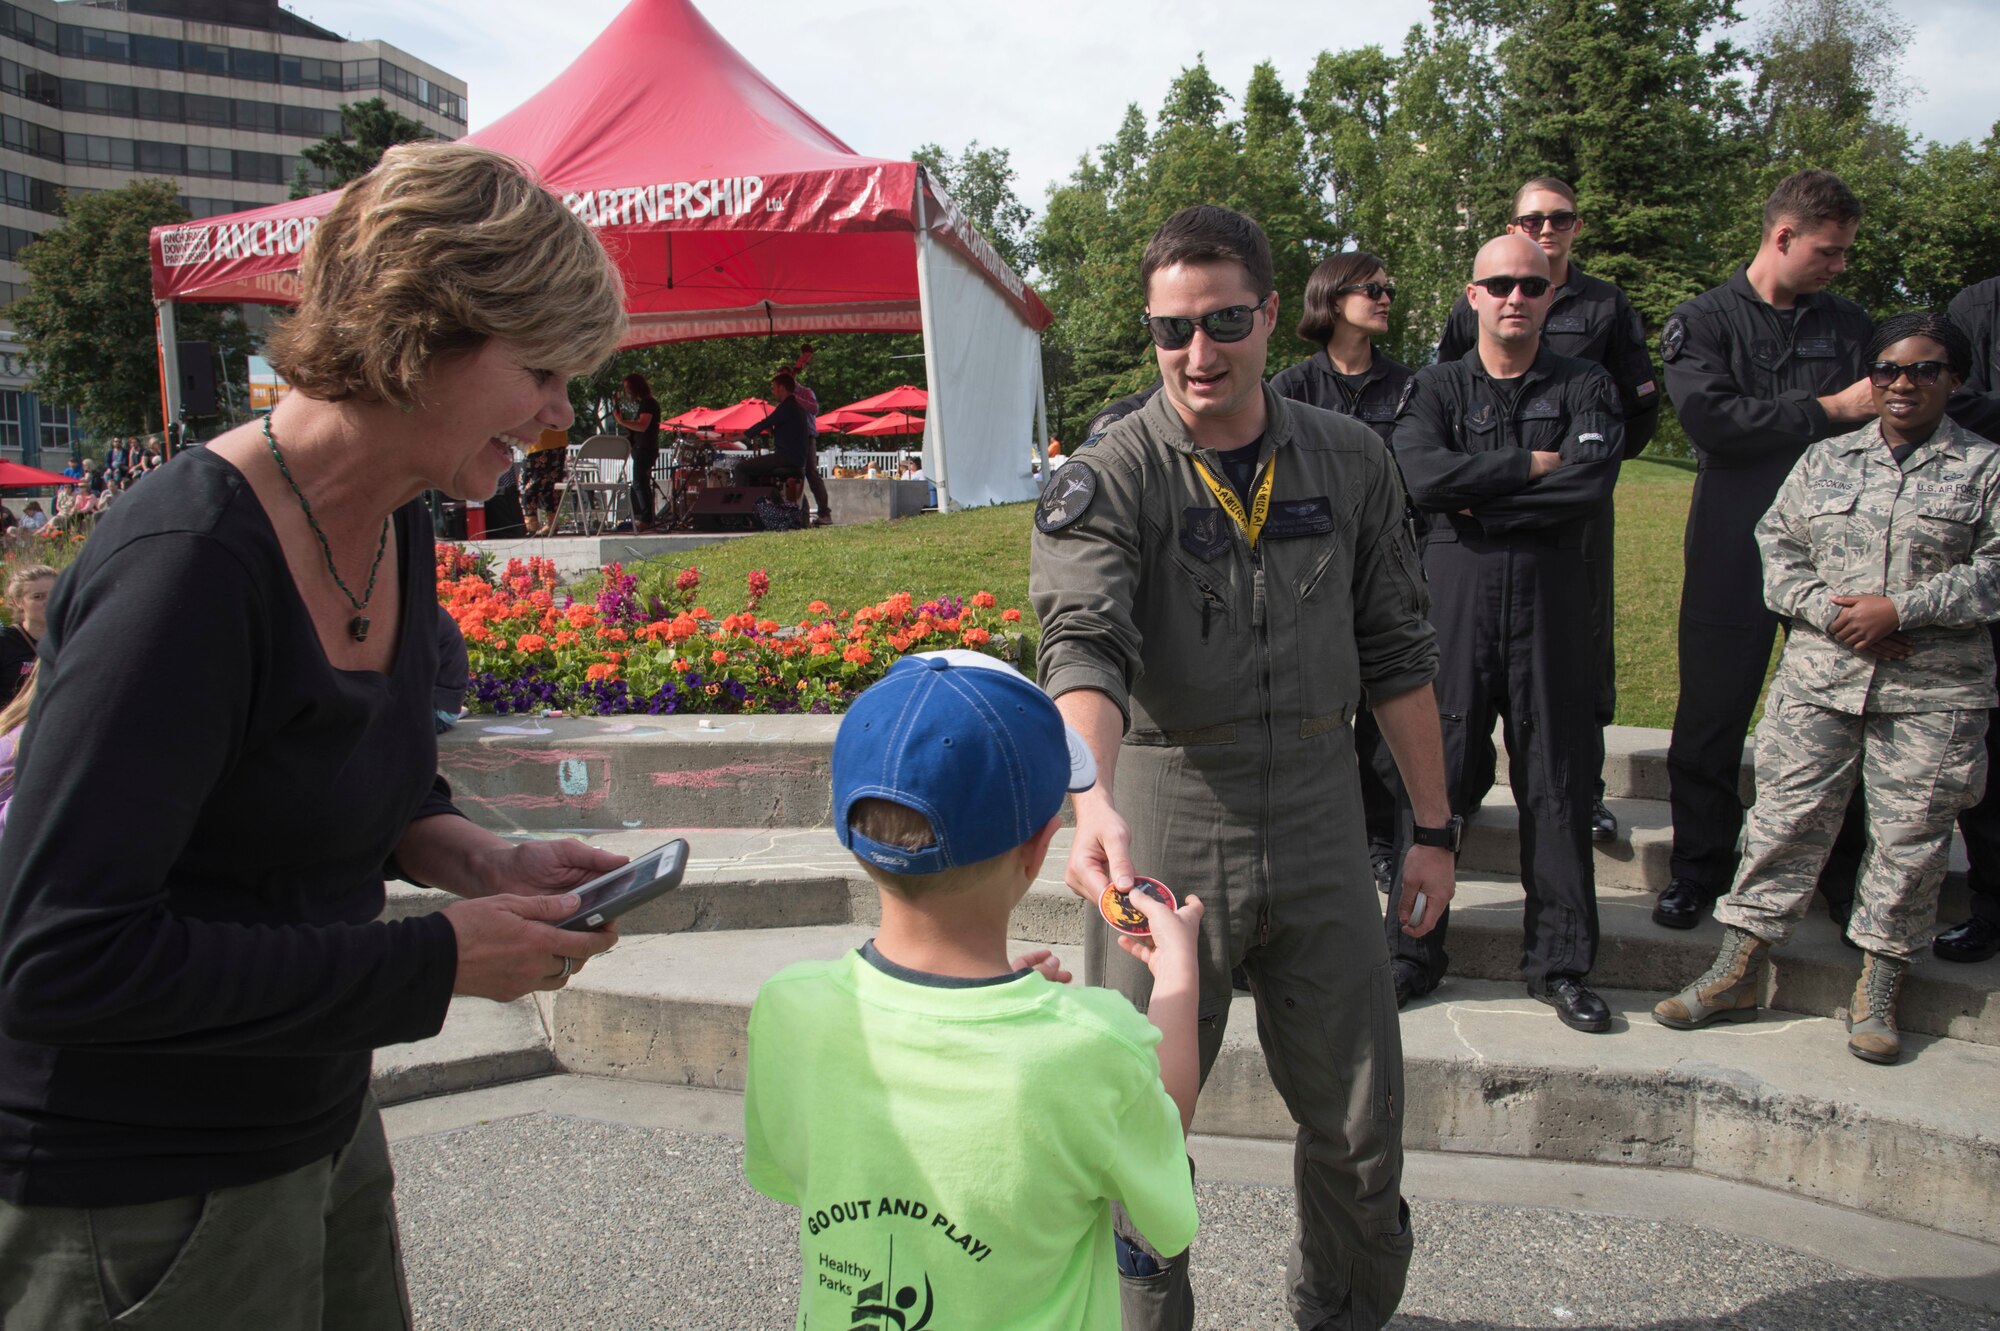 Alaskan natives, Bonnie Luther, left, and her grandson, Maddox Luther, center, receive a Pacific Air Forces’ F-16 Demonstration Team sticker from U.S. Air Force Capt. Jake Impellizzeri, the PACAF F-16 Demonstration Team pilot, during a meet-and-greet session in Anchorage, Alaska, June 29, 2018. The team performed at the Arctic Thunder 2018 air show and showcased the F-16 Fighting Falcon’s capabilities. During their trip, the team engaged with the community to strengthen bonds between the Air Force and the local area. (U.S. Air Force photo by Senior Airman Sadie Colbert)